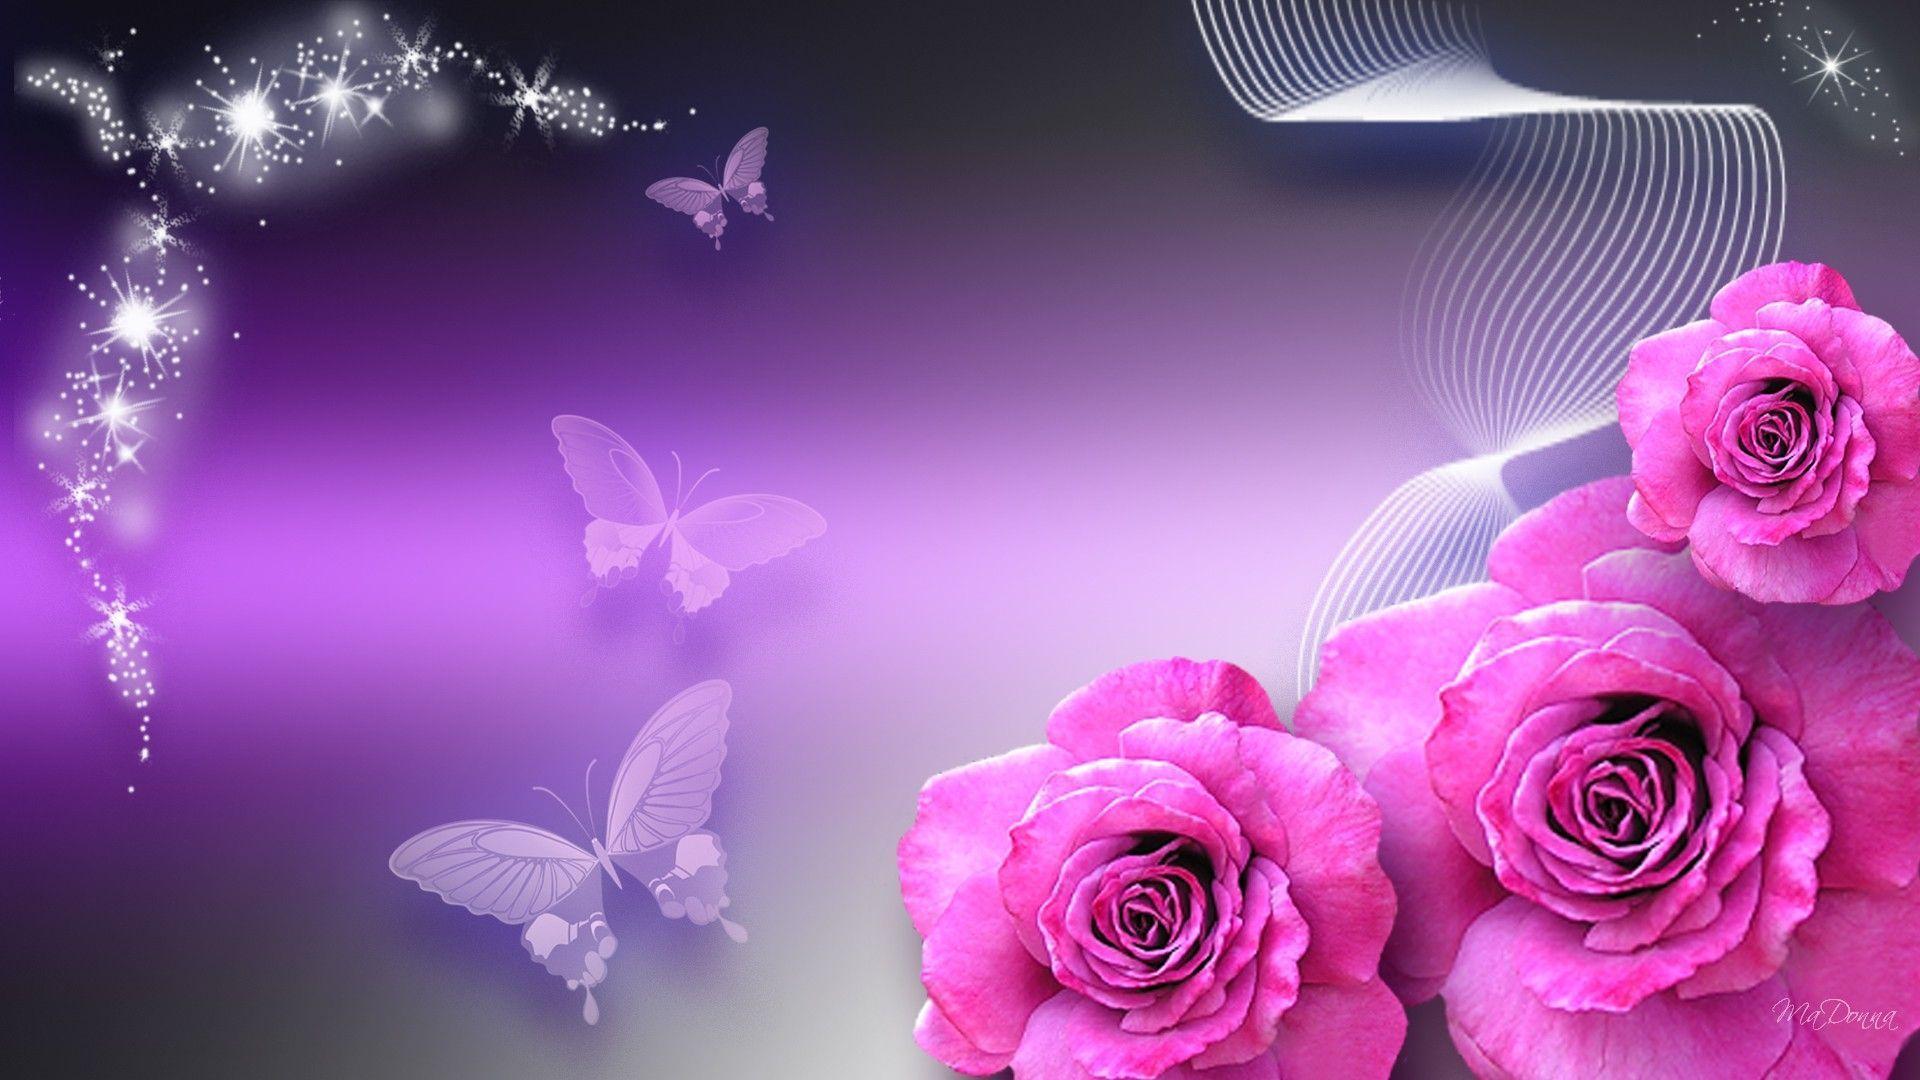 Wallpaper For > Pink And Purple Butterfly Wallpaper